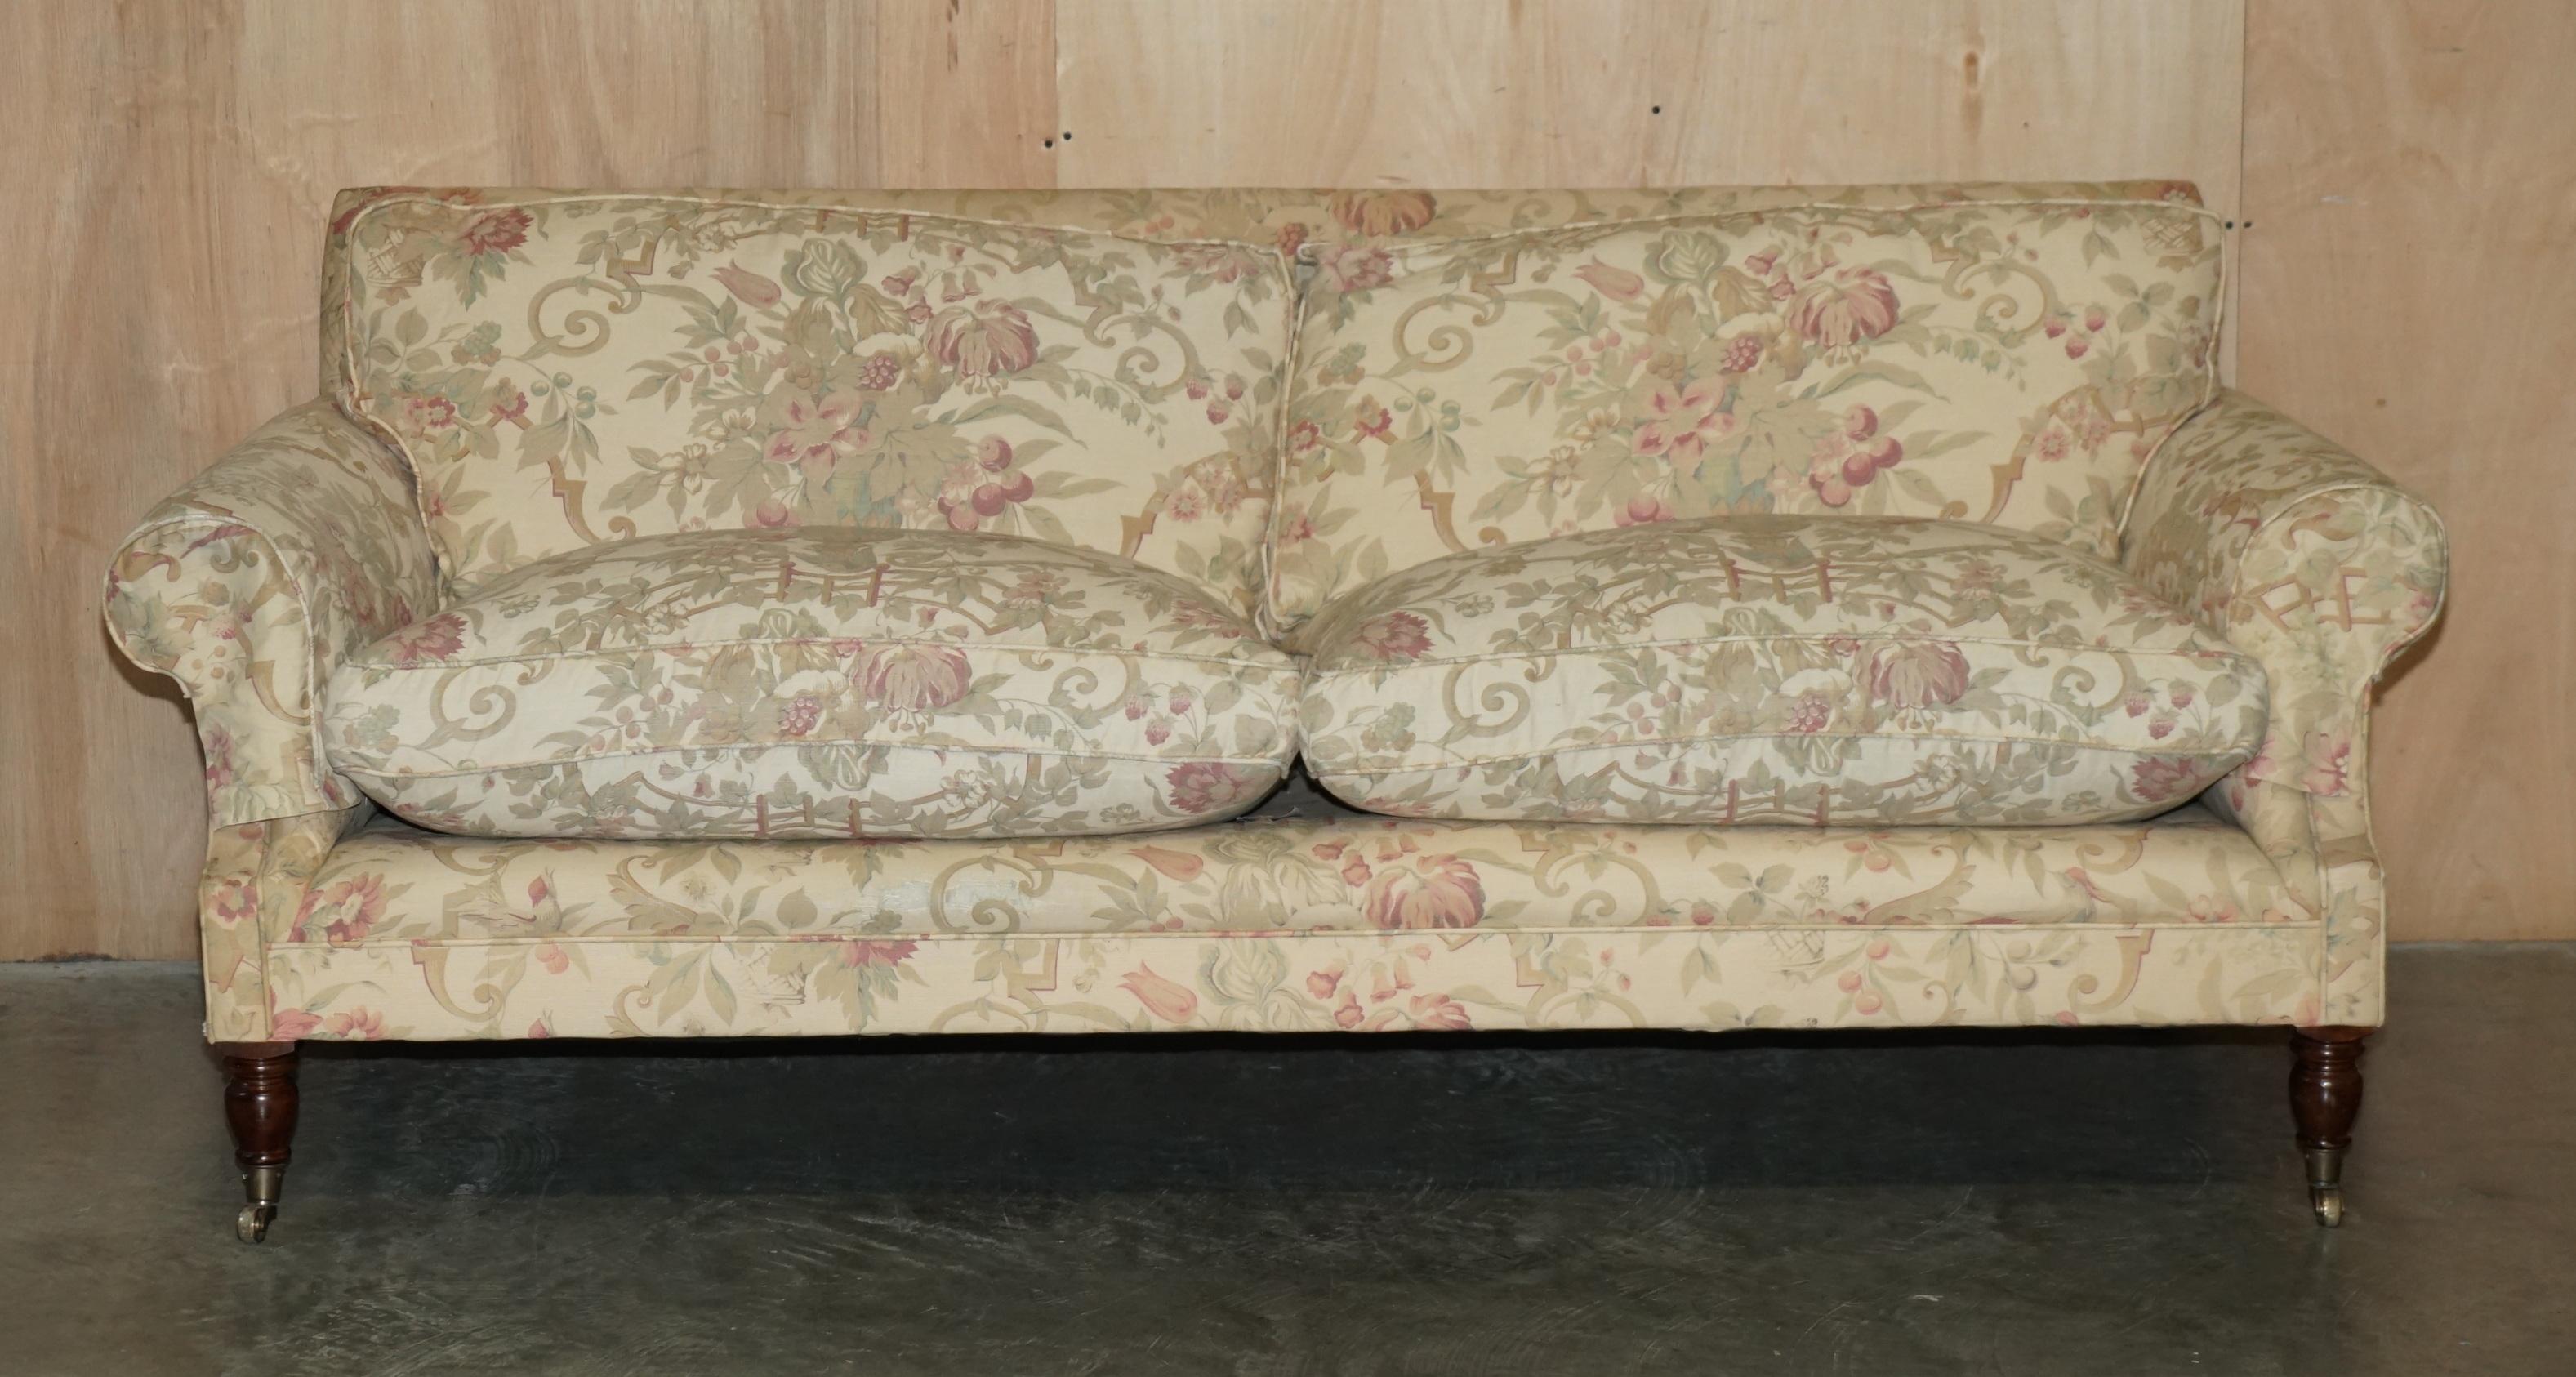 Country GEORGE SMITH CHELSEA 3 SEAT SOFA IN ORIGINAL UPHOLSTERY PART SUiTE For Sale